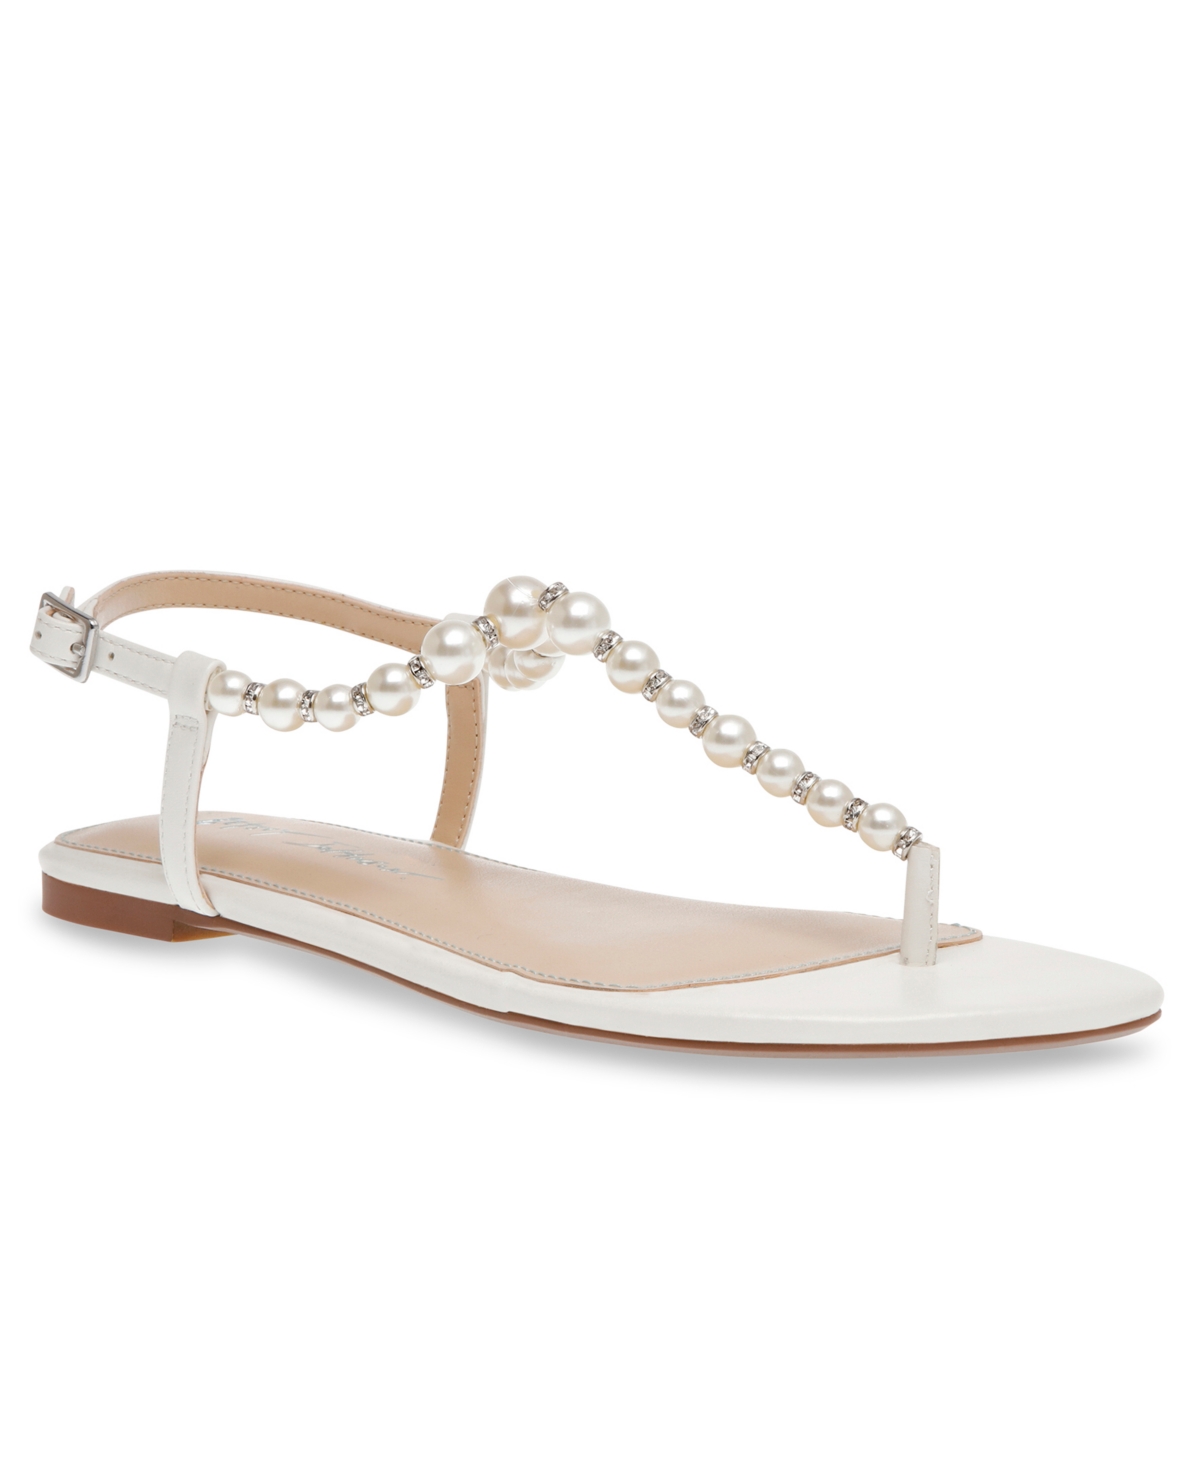 Women's Gal Pearl T Strap Sandals - Ivory